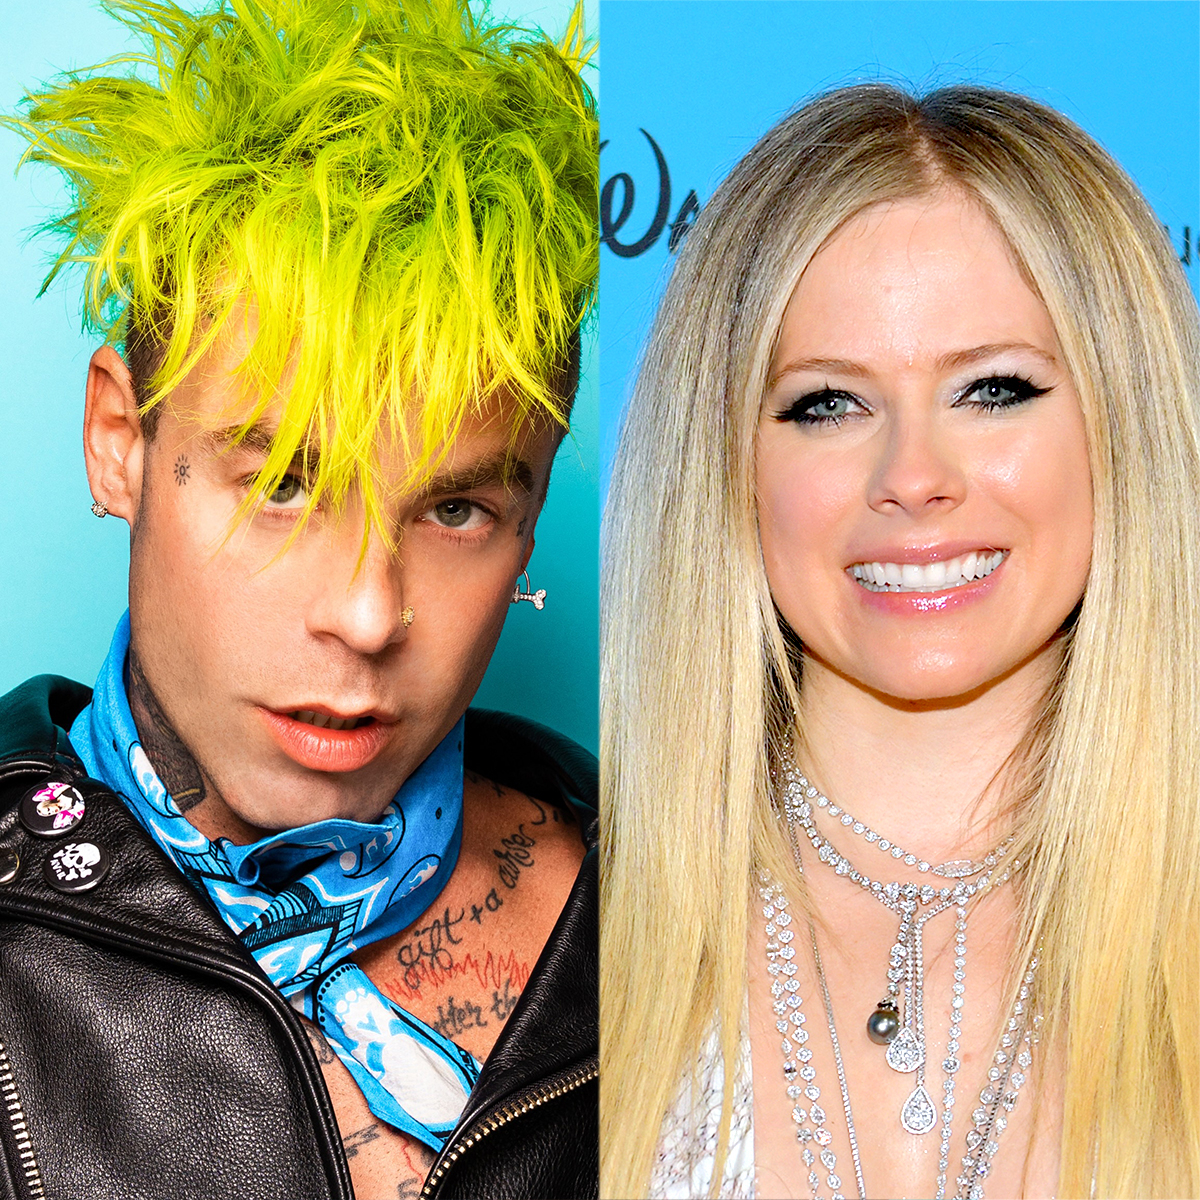 Mod Sun Gets Avril Lavignes Name Tattooed On Neck Amid Dating Rumors 